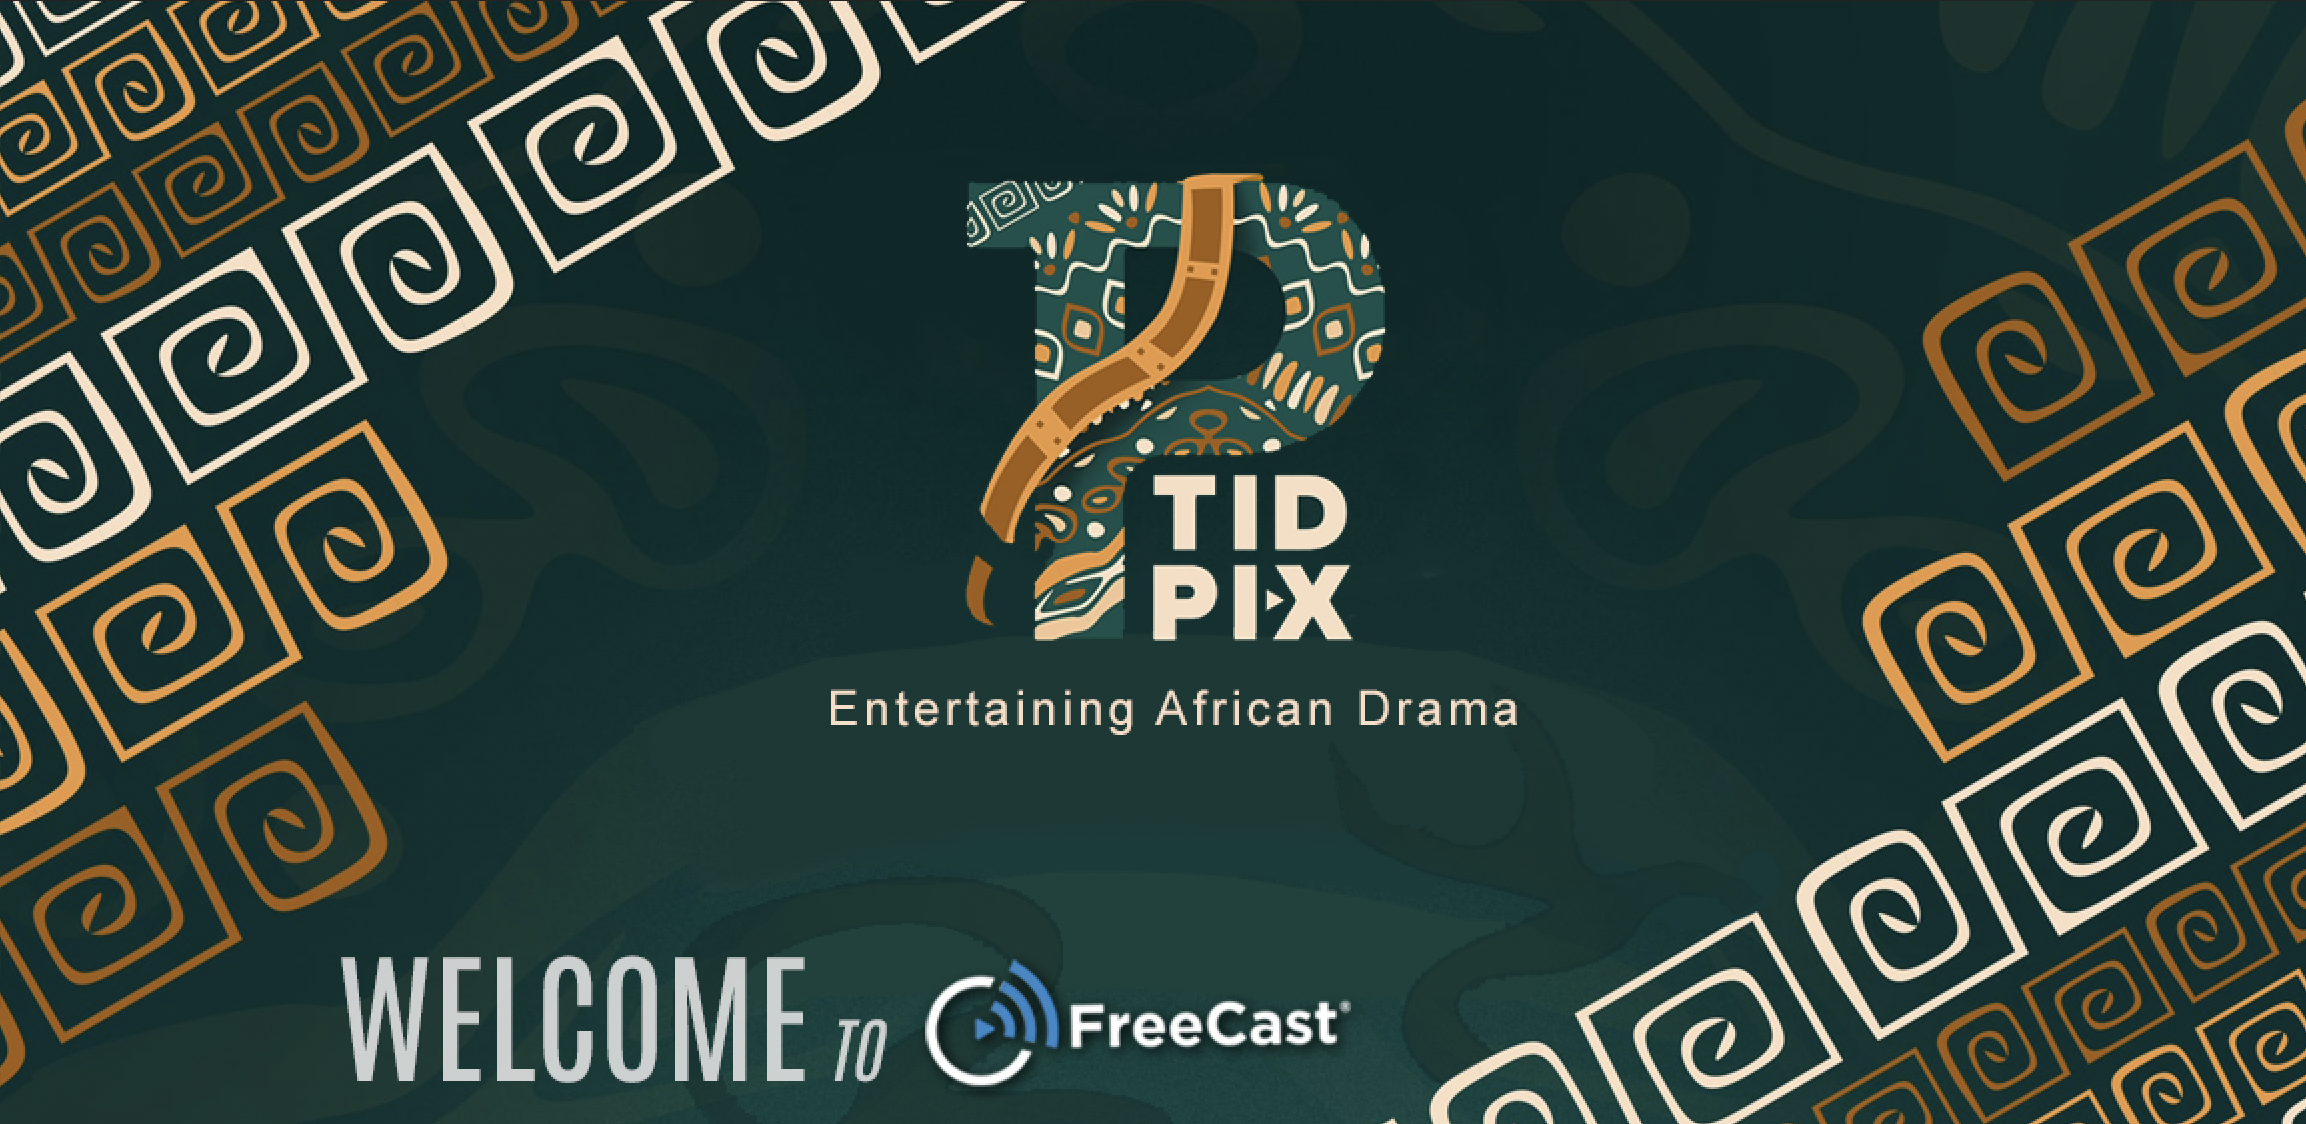 African Drama FAST Channel TidPix Comes to FreeCast